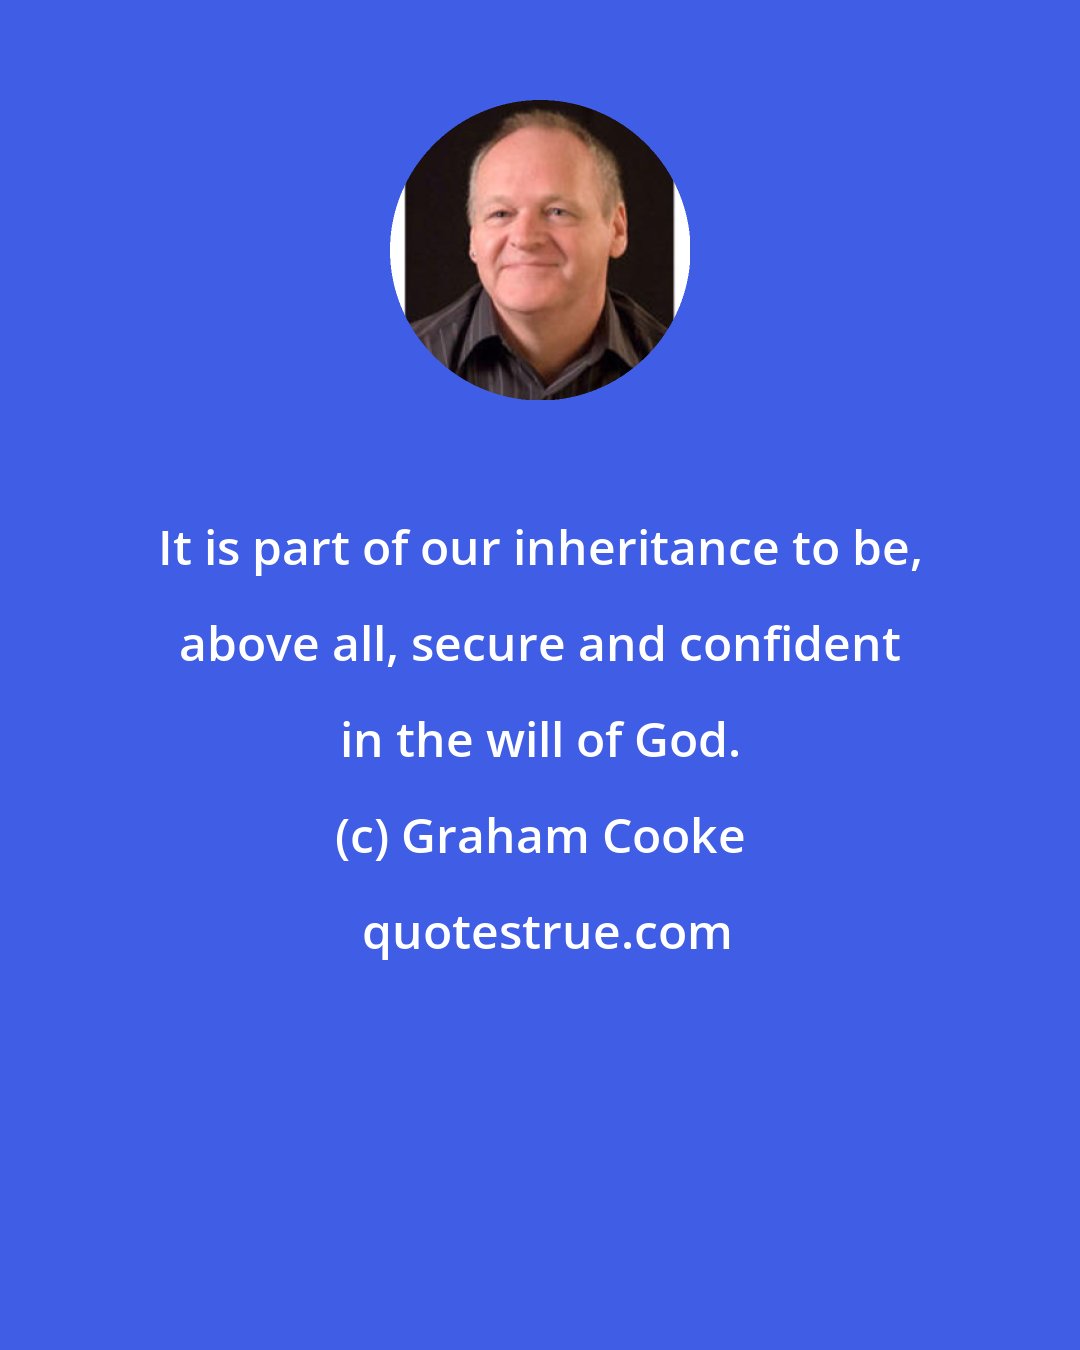 Graham Cooke: It is part of our inheritance to be, above all, secure and confident in the will of God.